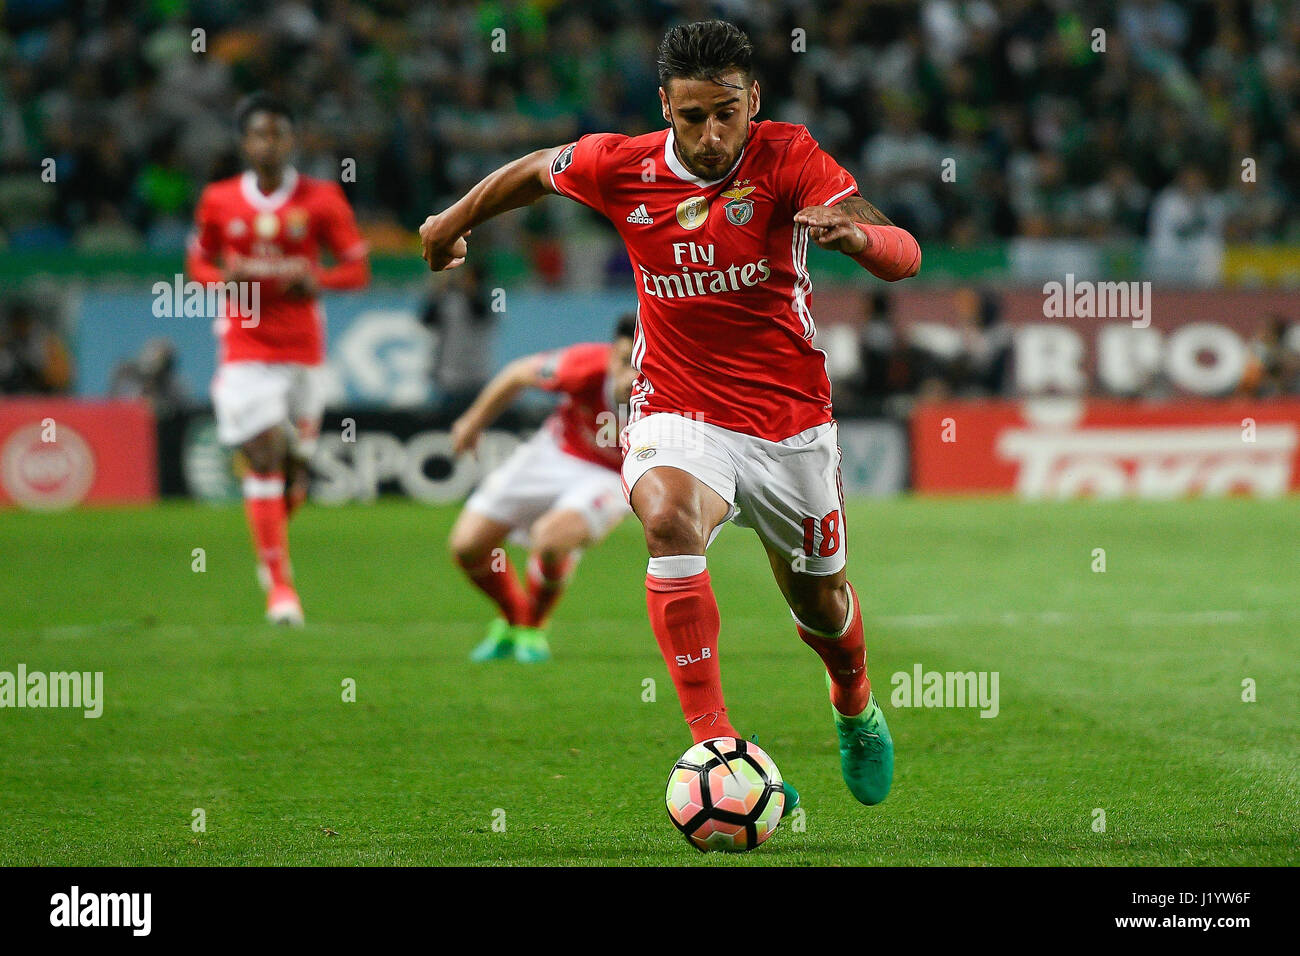 Portugal, Lisbon, April 22, 2017 - FOOTBALL: SPORTING CP x SL BENFICA - Eduardo Salvio #18 Benfica midfielder from Argentina in action during Portuguese First League football match between Sporting CP and SL Benfica in Alvalade Stadium on April 22, 2017 in Lisbon, Portugal. Photo: Bruno de Carvalho/Alamy Live News Stock Photo